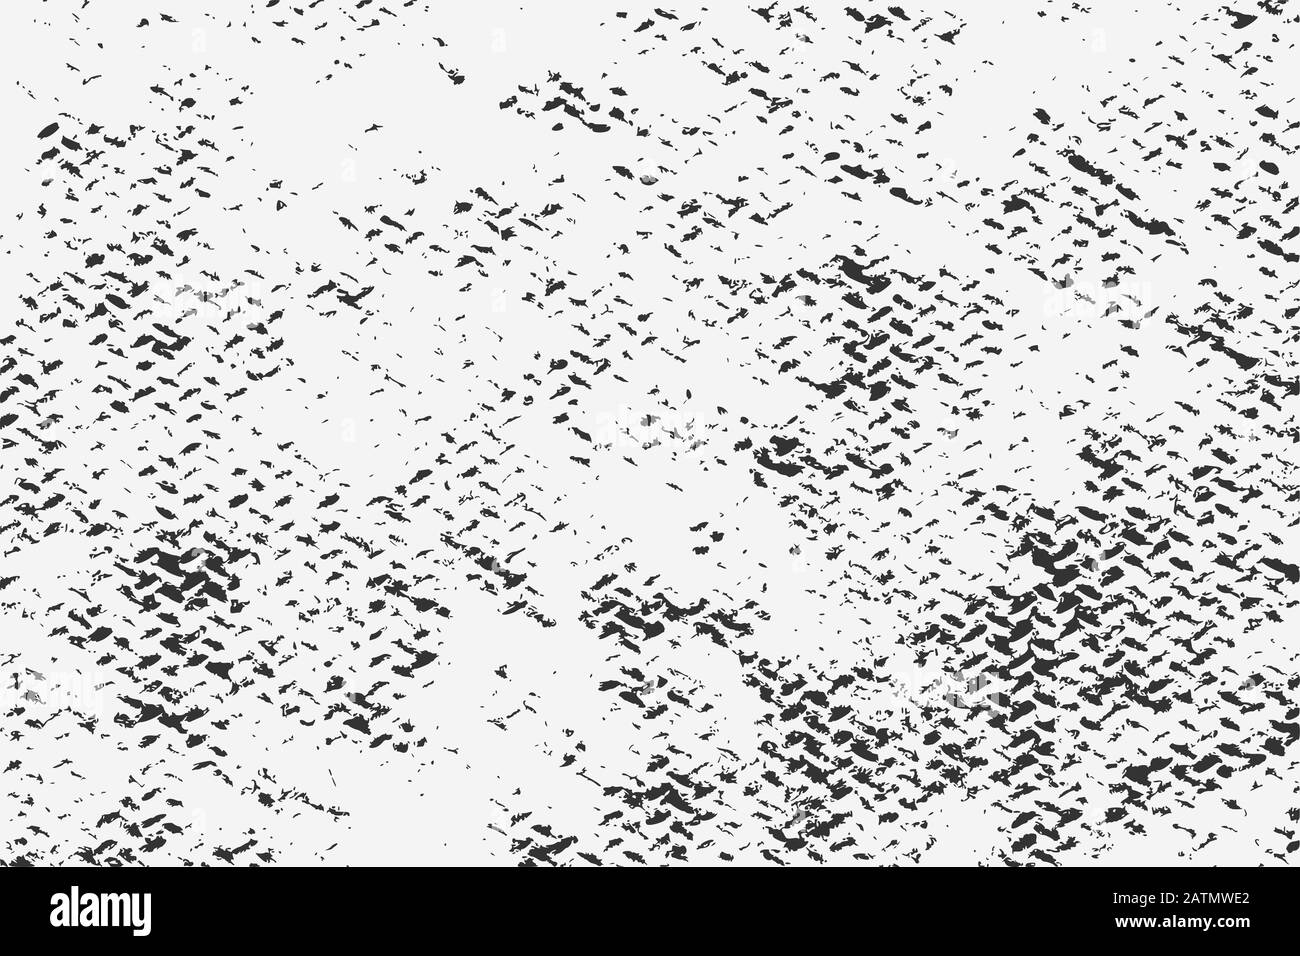 Abstract grunge overlay fabric texture. Vector illustration of black and white grunge background for your design Stock Vector